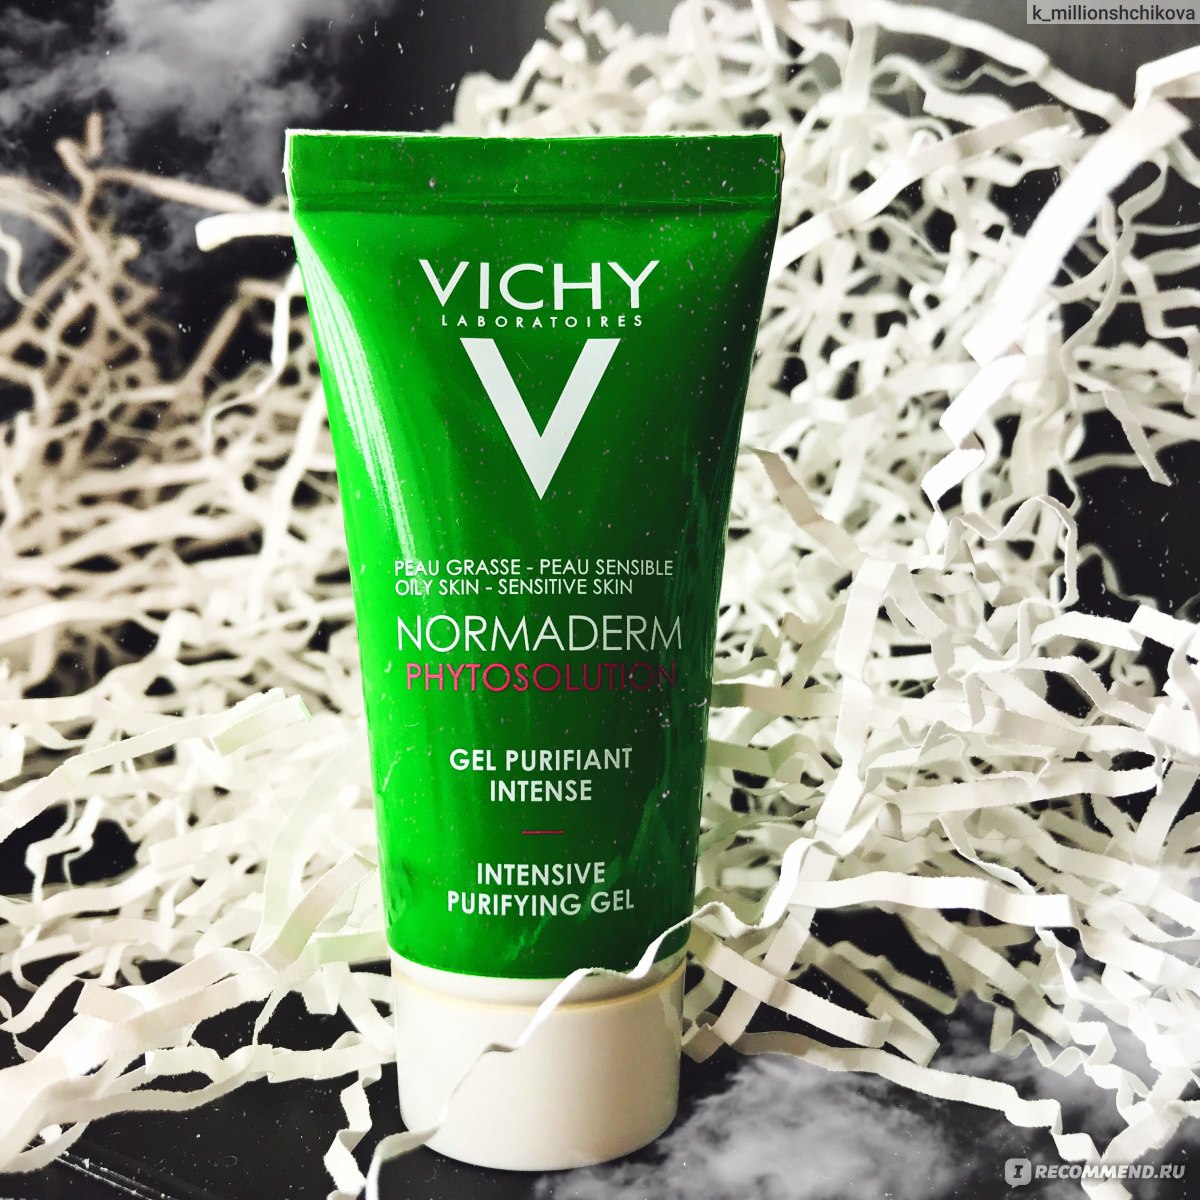 Normaderm gel purifiant. Vichy Normaderm fitsolution. Vichy Normaderm phytosolution Gel purifiant intense. Виши умывалка зеленая. Vichy Normaderm гель для умывания.